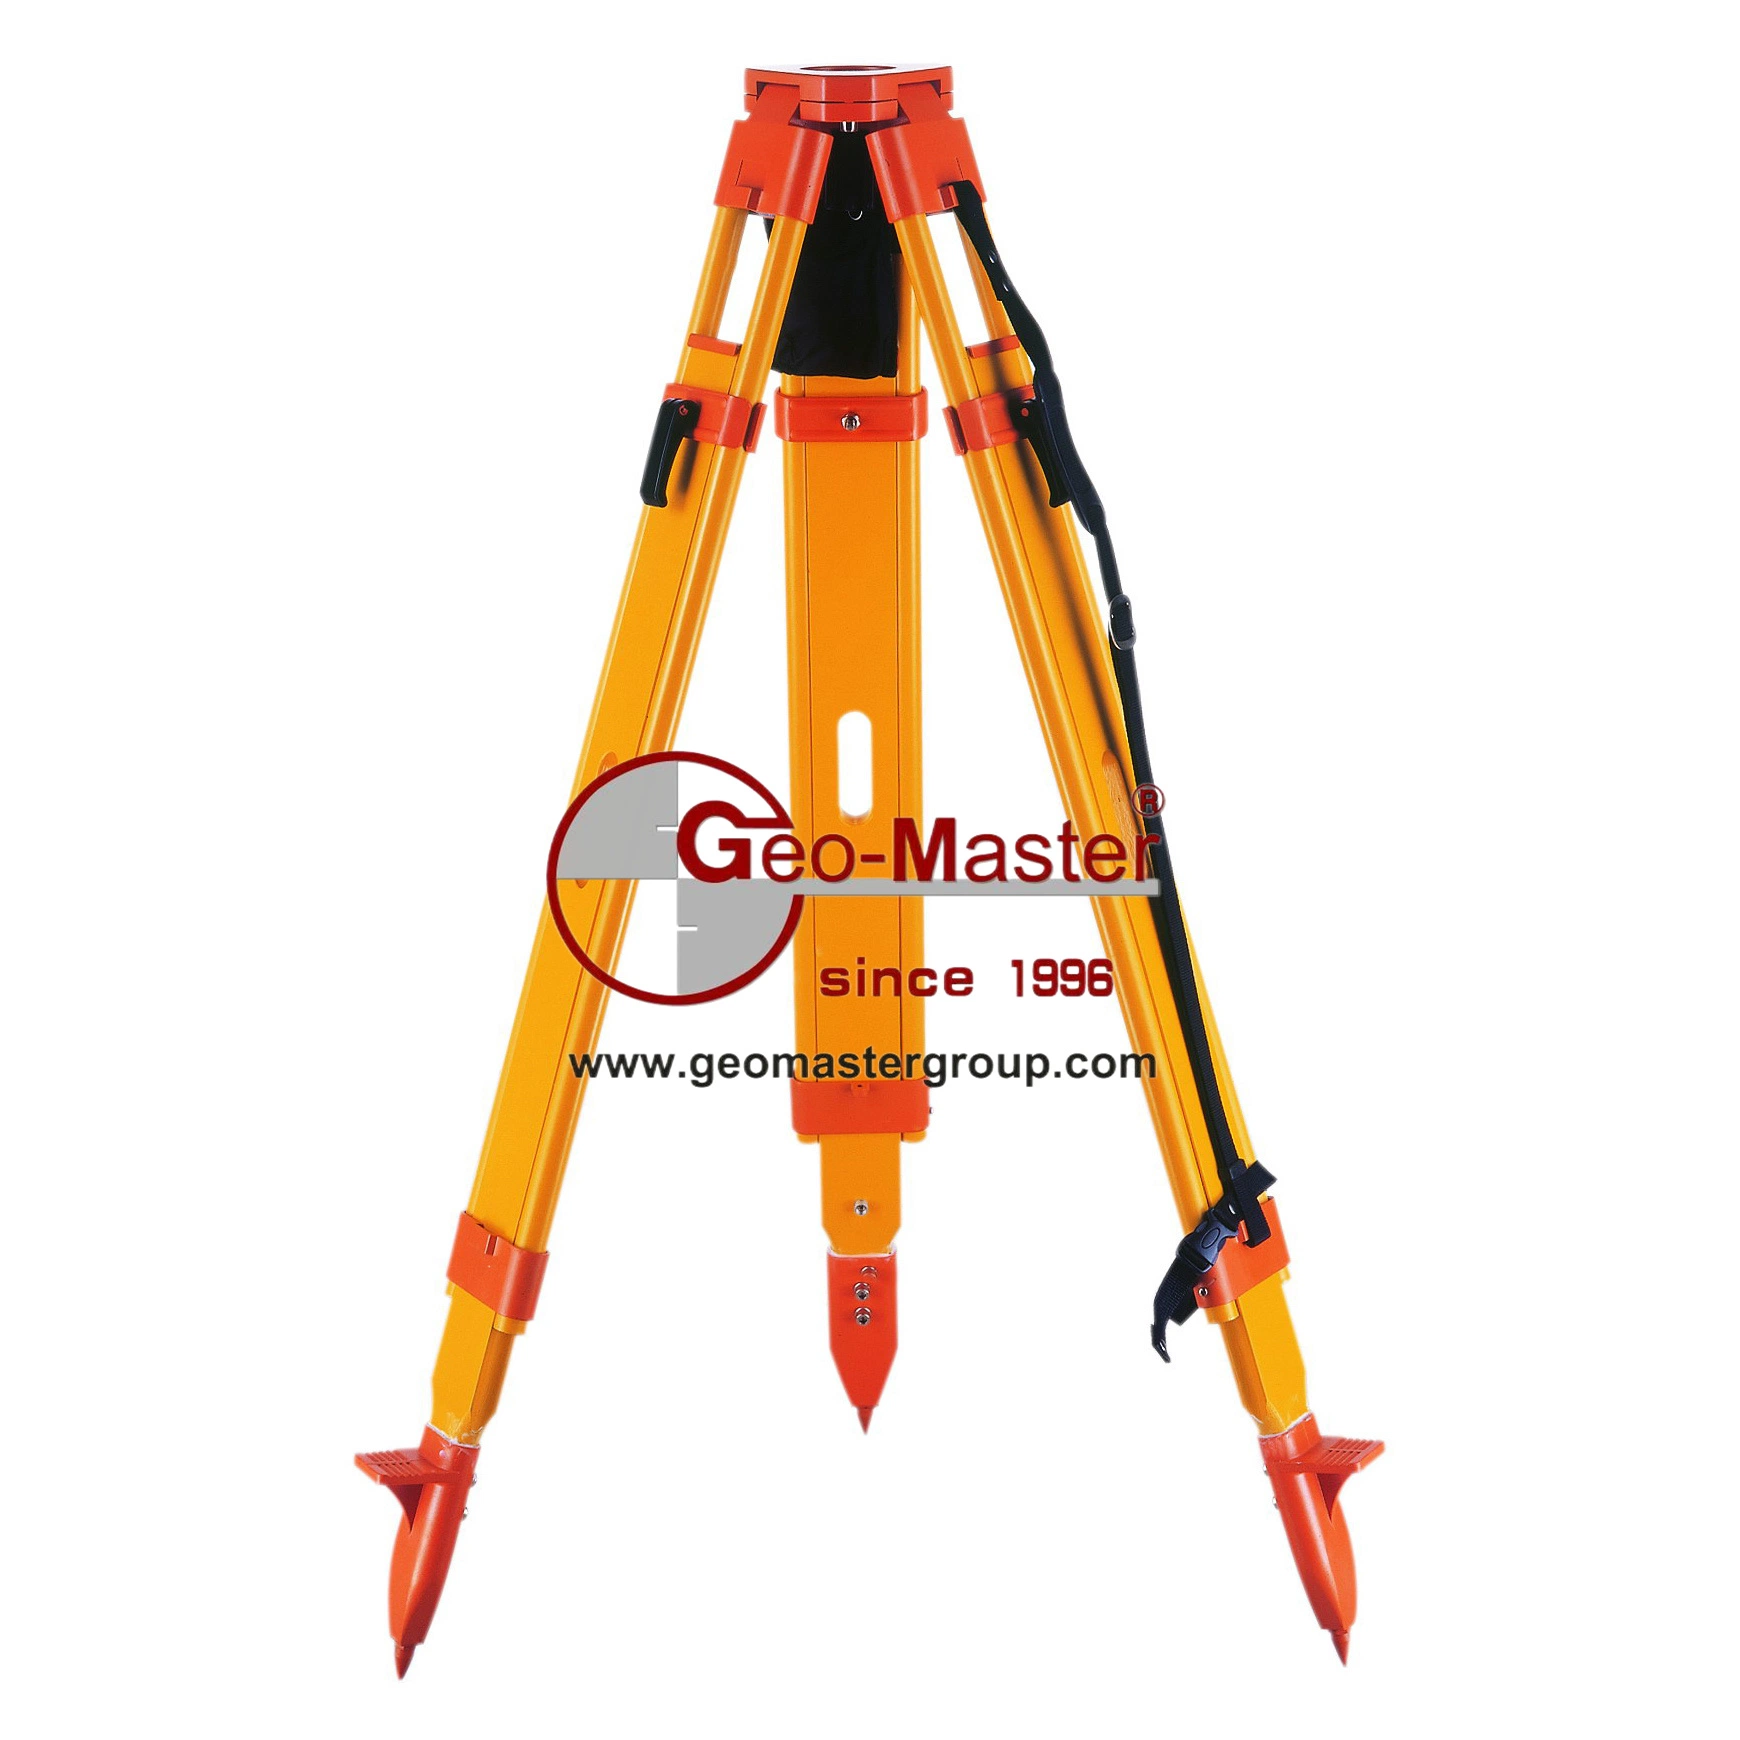 Geomaster Heavy-Duty Wooden Tripod for Surveying Instruments, Total Stations, Laser Trackers, Theodolites